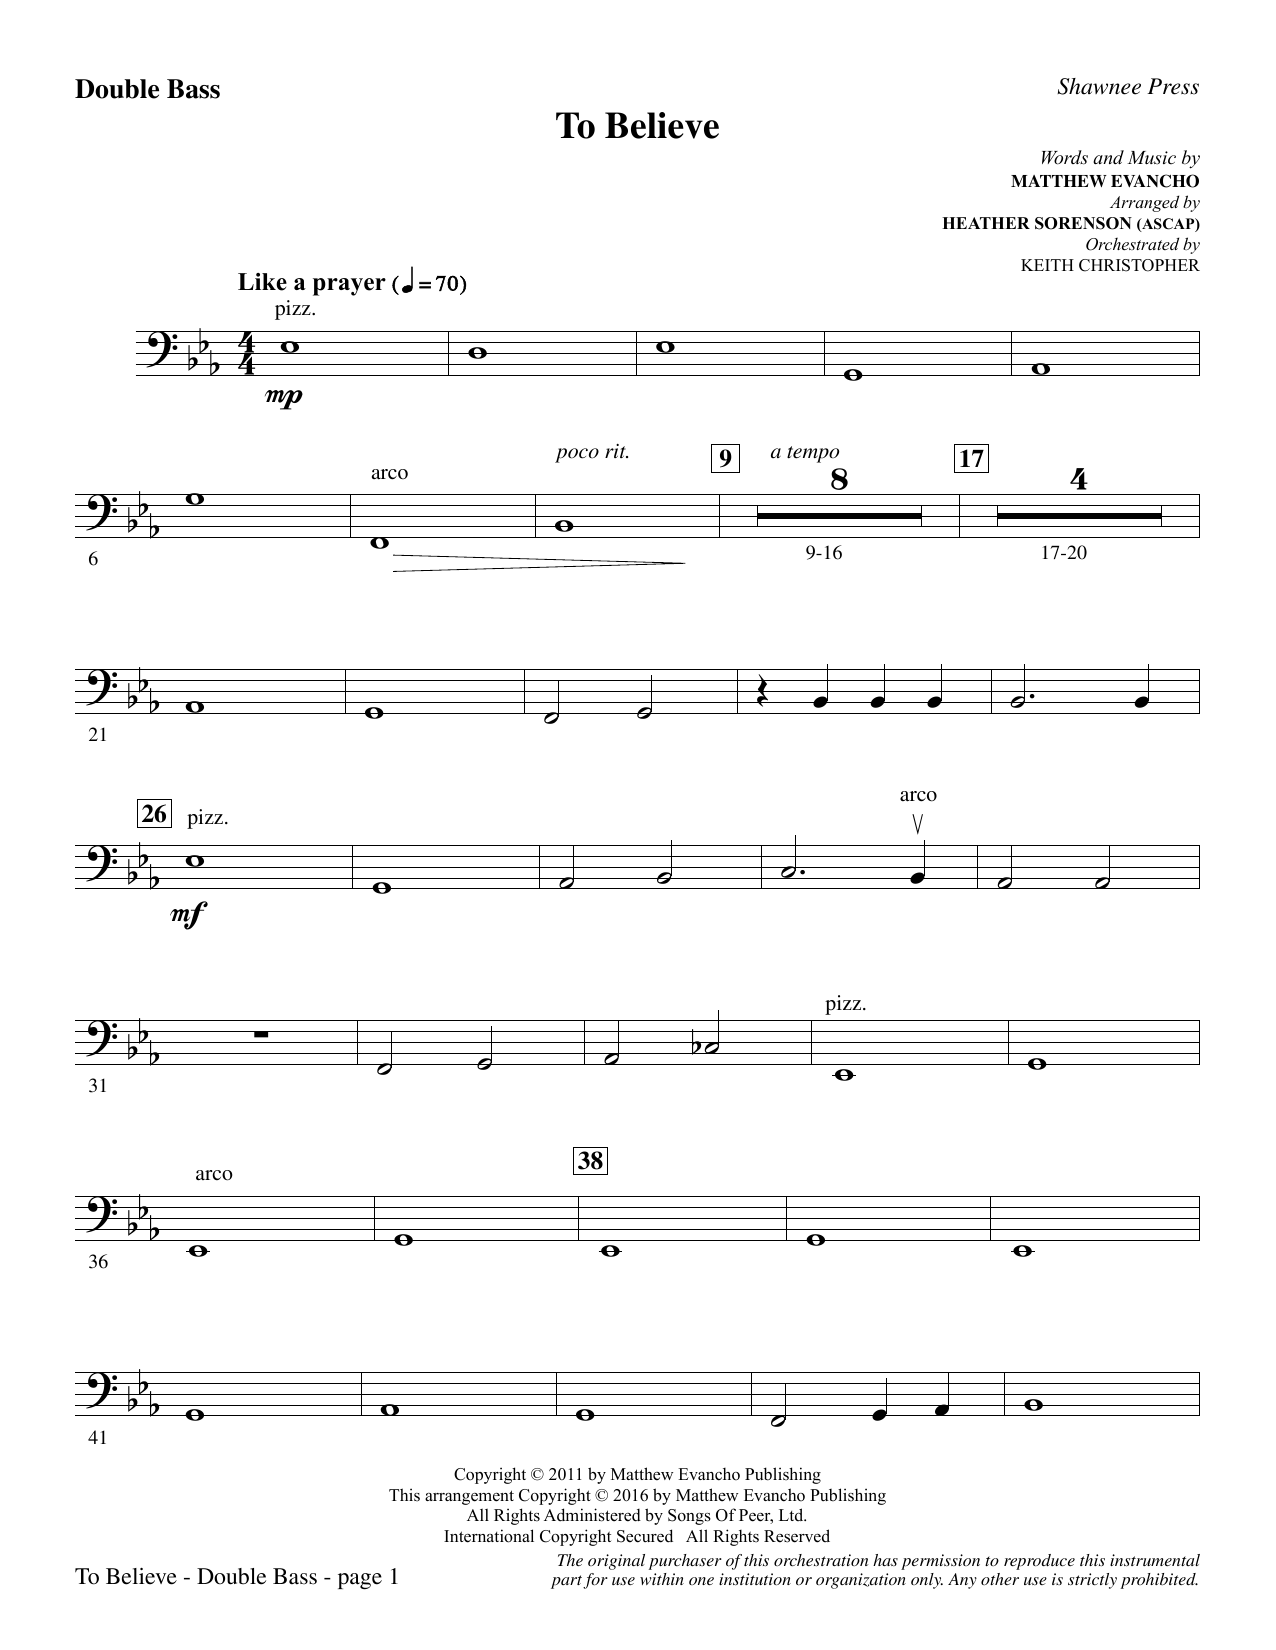 Download Heather Sorenson To Believe - Double Bass sheet music and printable PDF score & Inspirational music notes